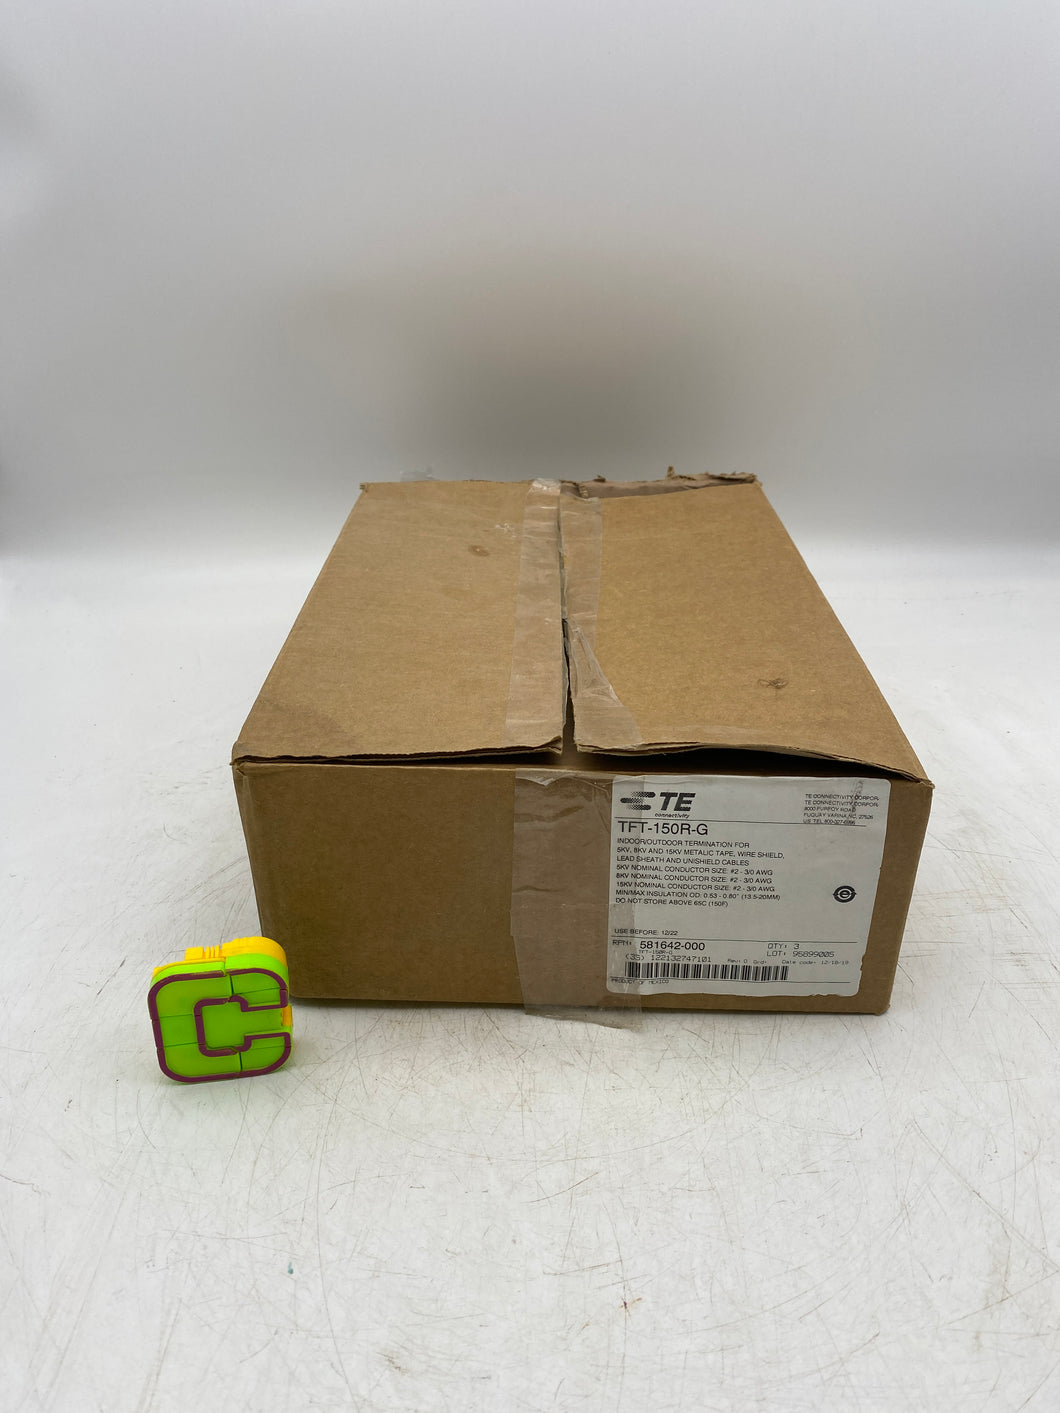 TE Connectivity 581642-000 TFT-150R-G Indoor/Out Termination Kit *Box of (1)* (Open Box)